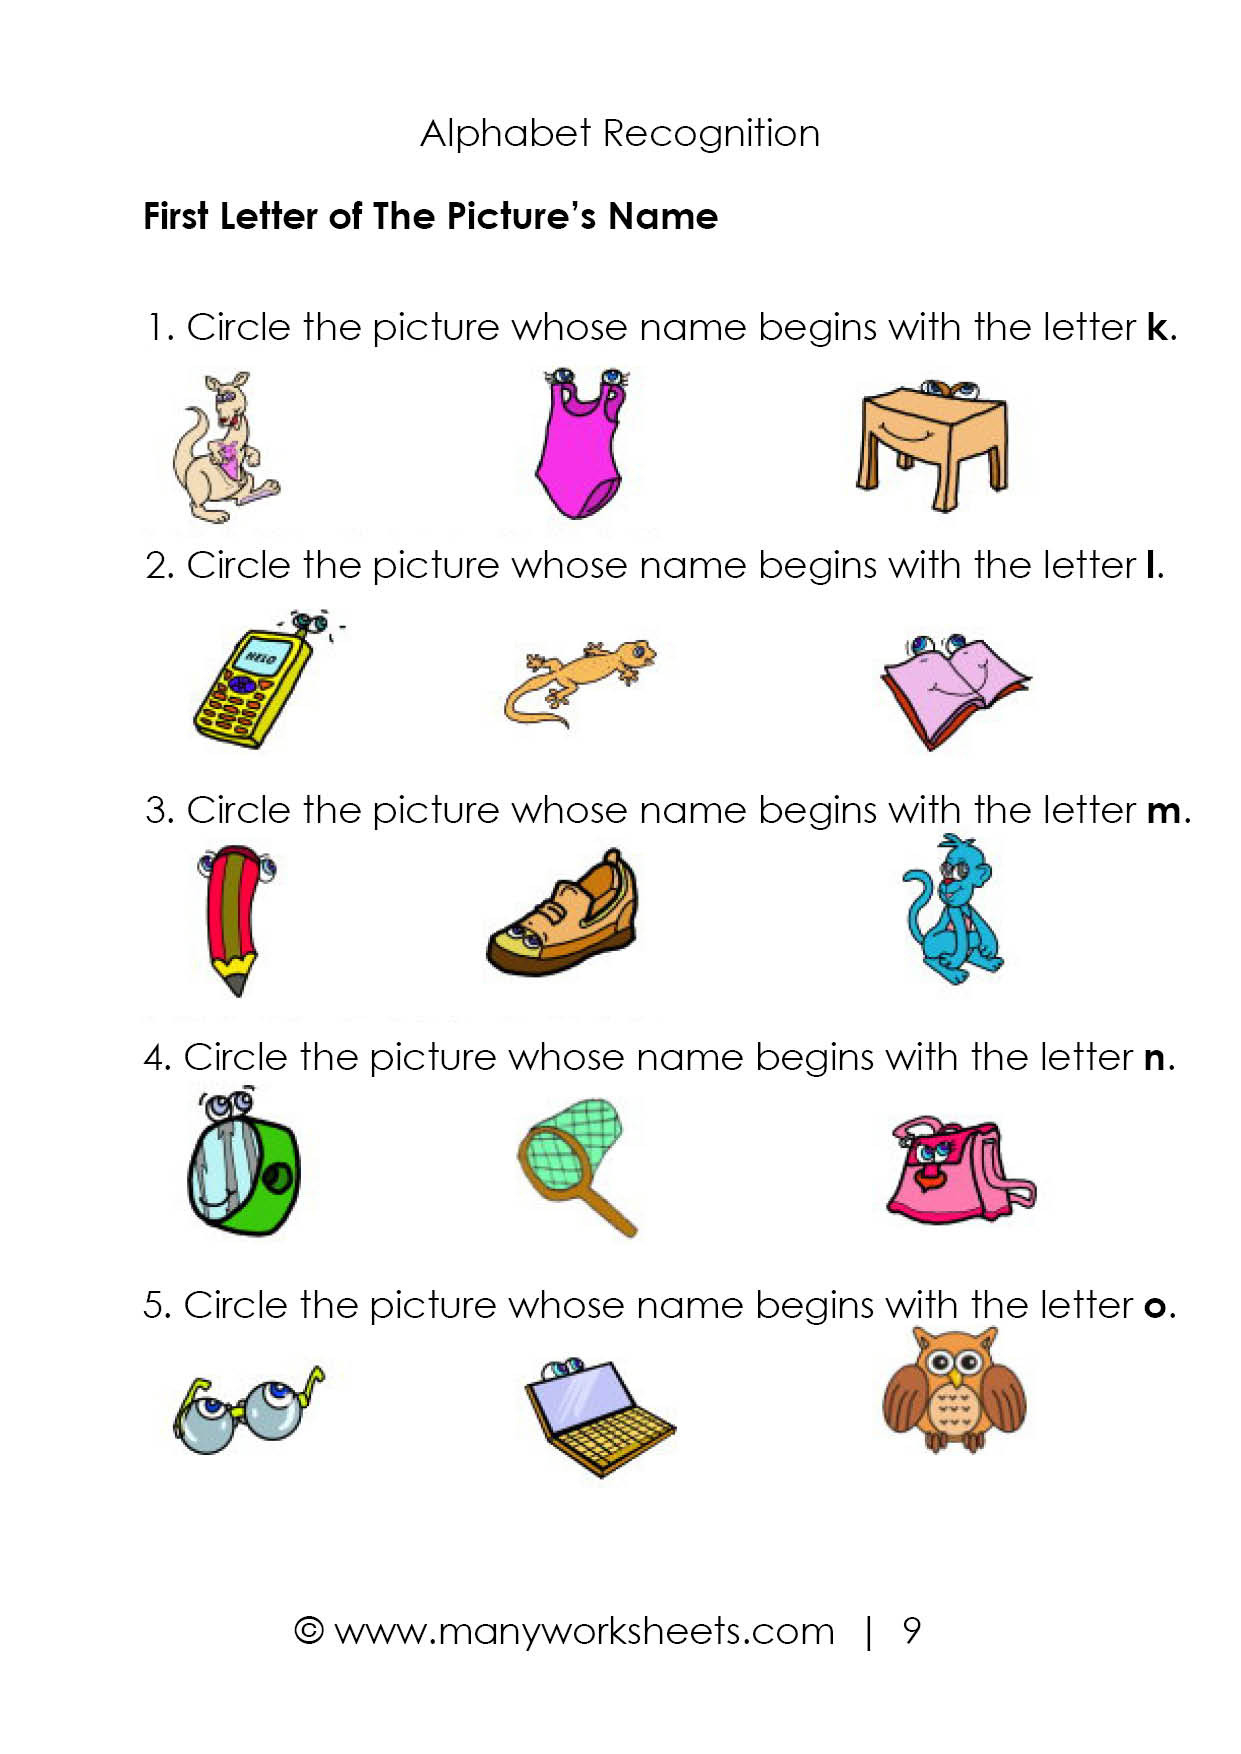 alphabet recognition worksheets photos alphabet collections db excelcom